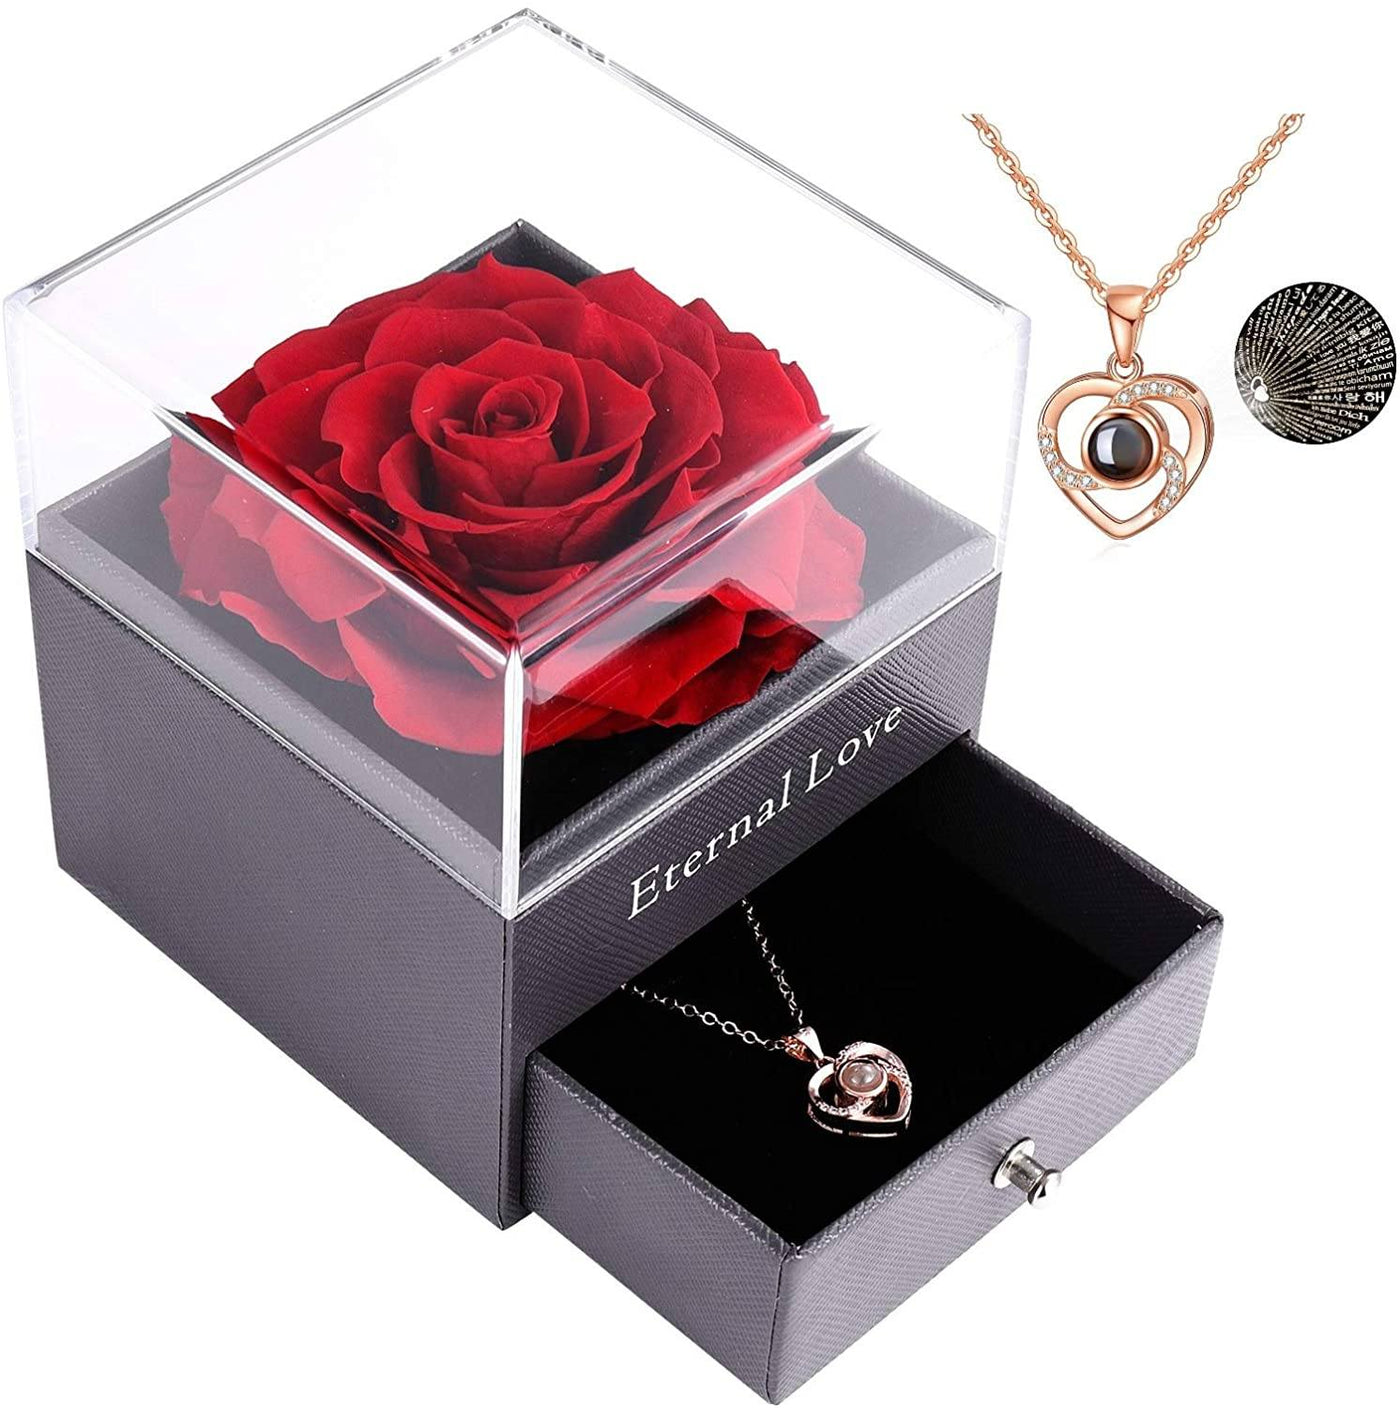 Rose Jewelry Box With Necklace KevenKosh® Box With Gold Heart Necklace 